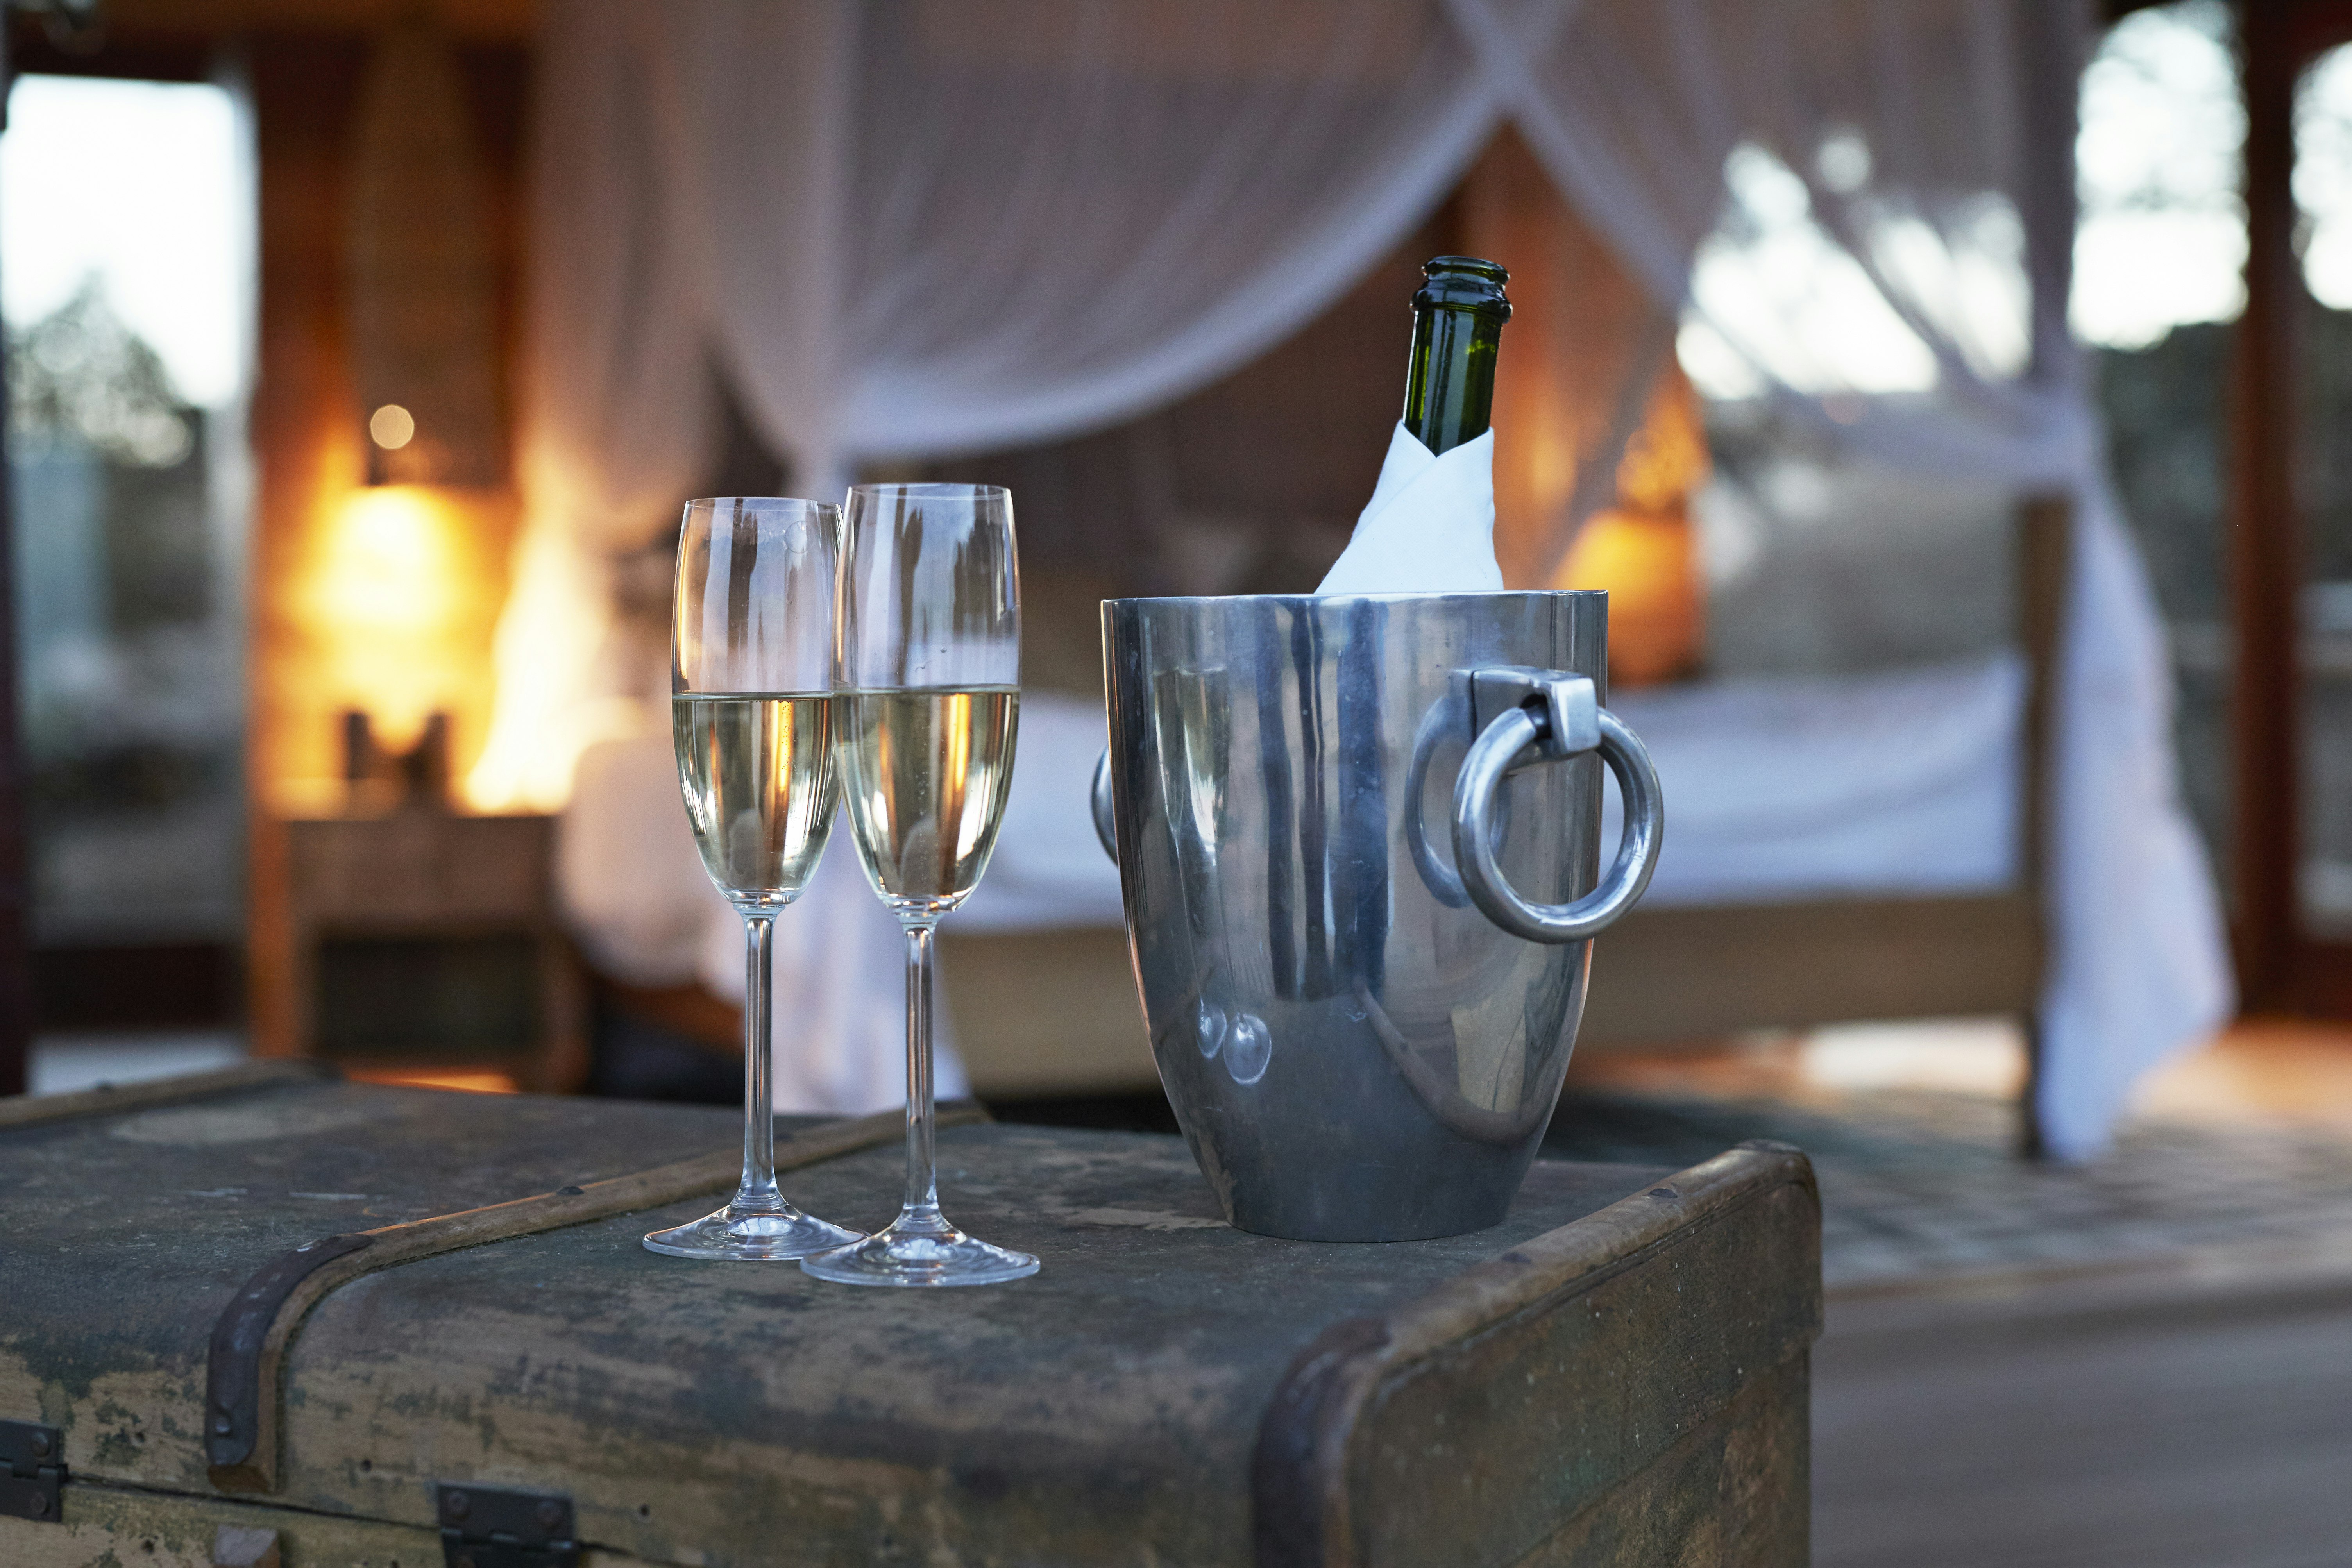 A bottle of champagne in a silver ice container sits next to two glasses of bubbly; in the background is a roaring fire.